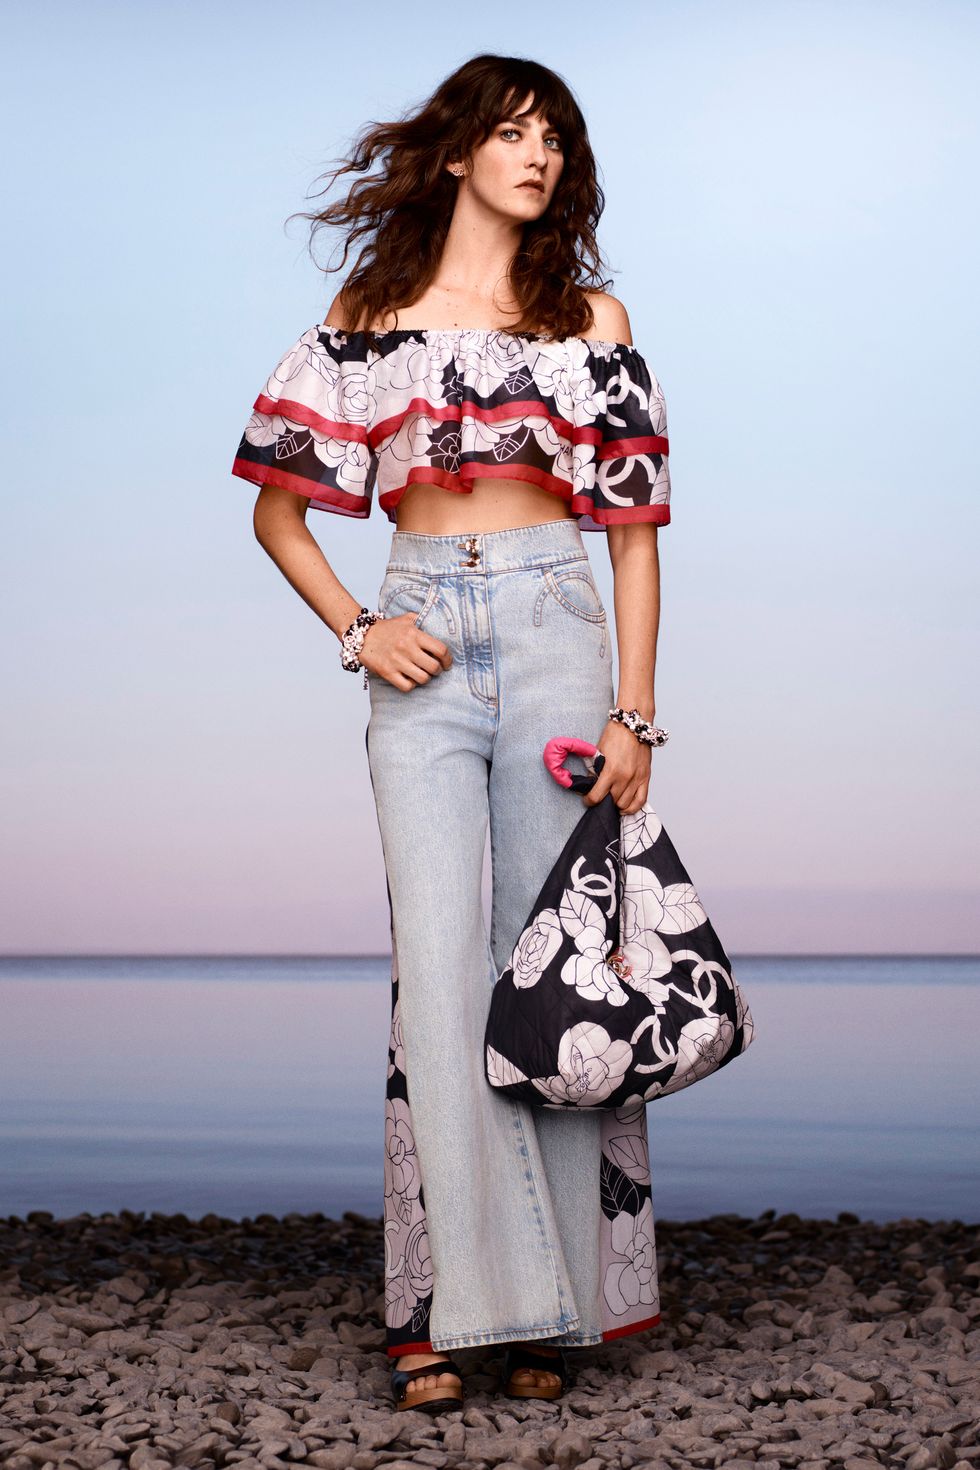 Chanel Cruise 2020 - New Chanel Creative Director Virginie Viard First  Collection